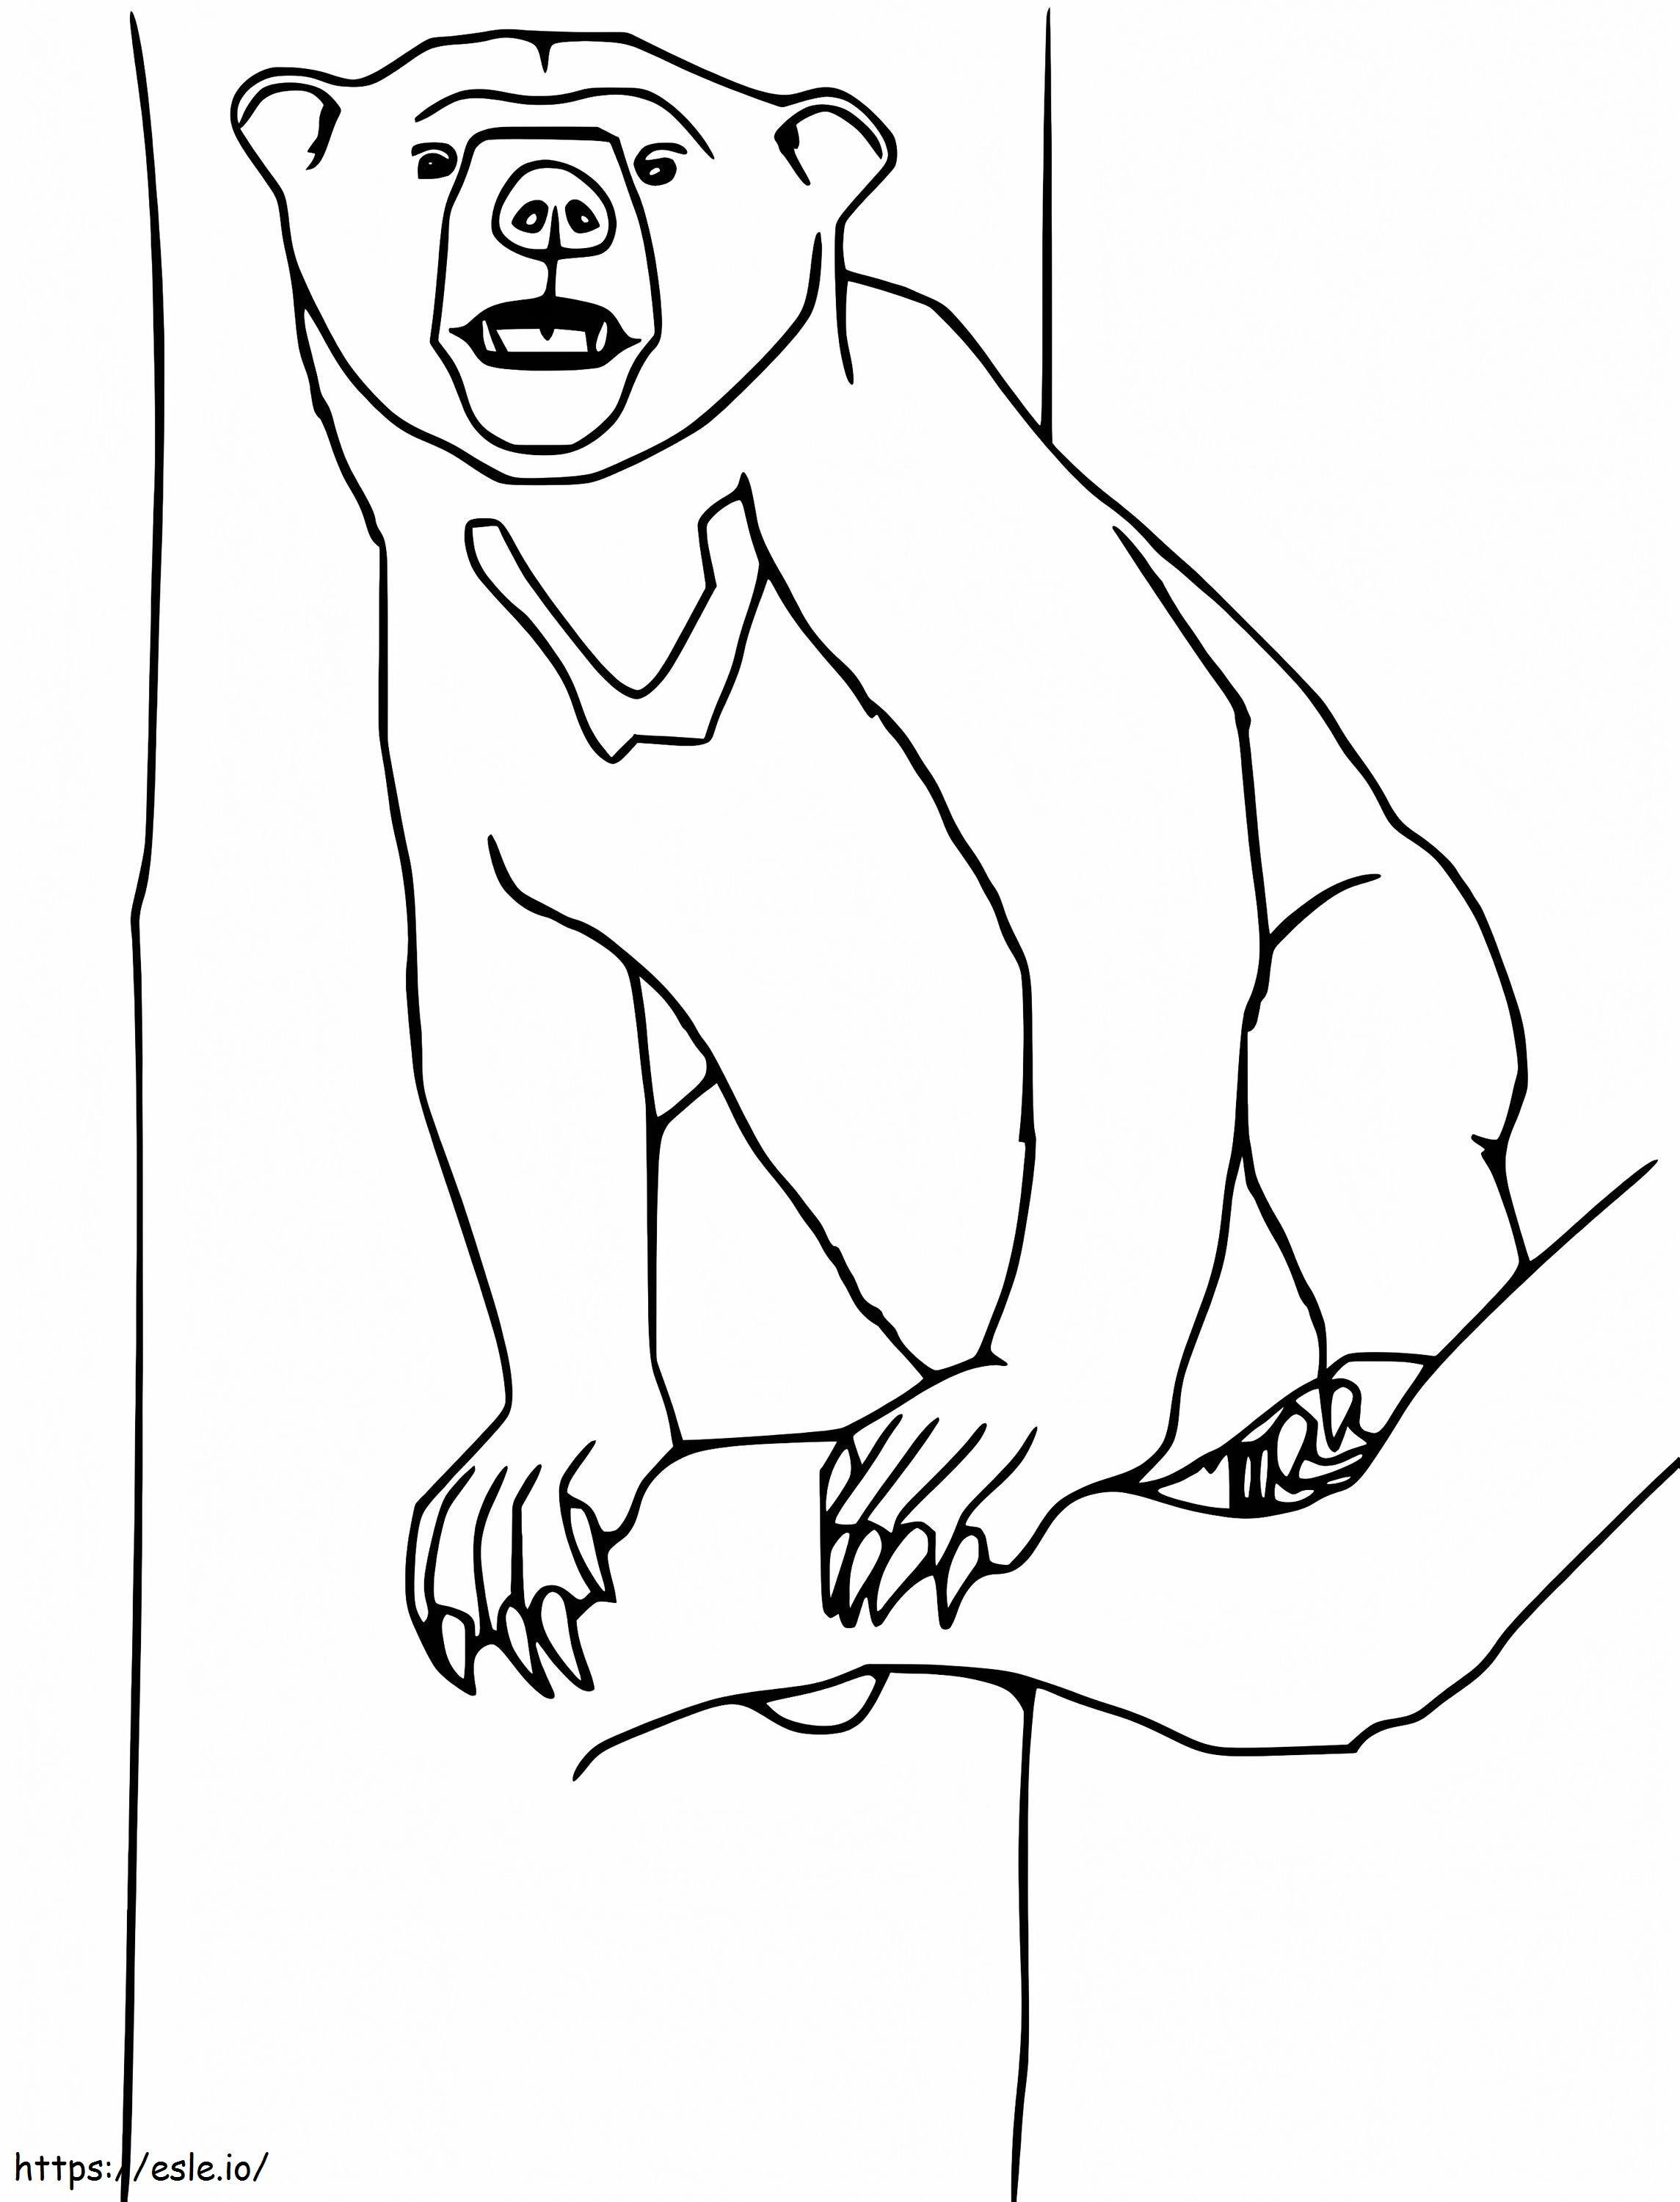 Sun Bear On A Tree coloring page